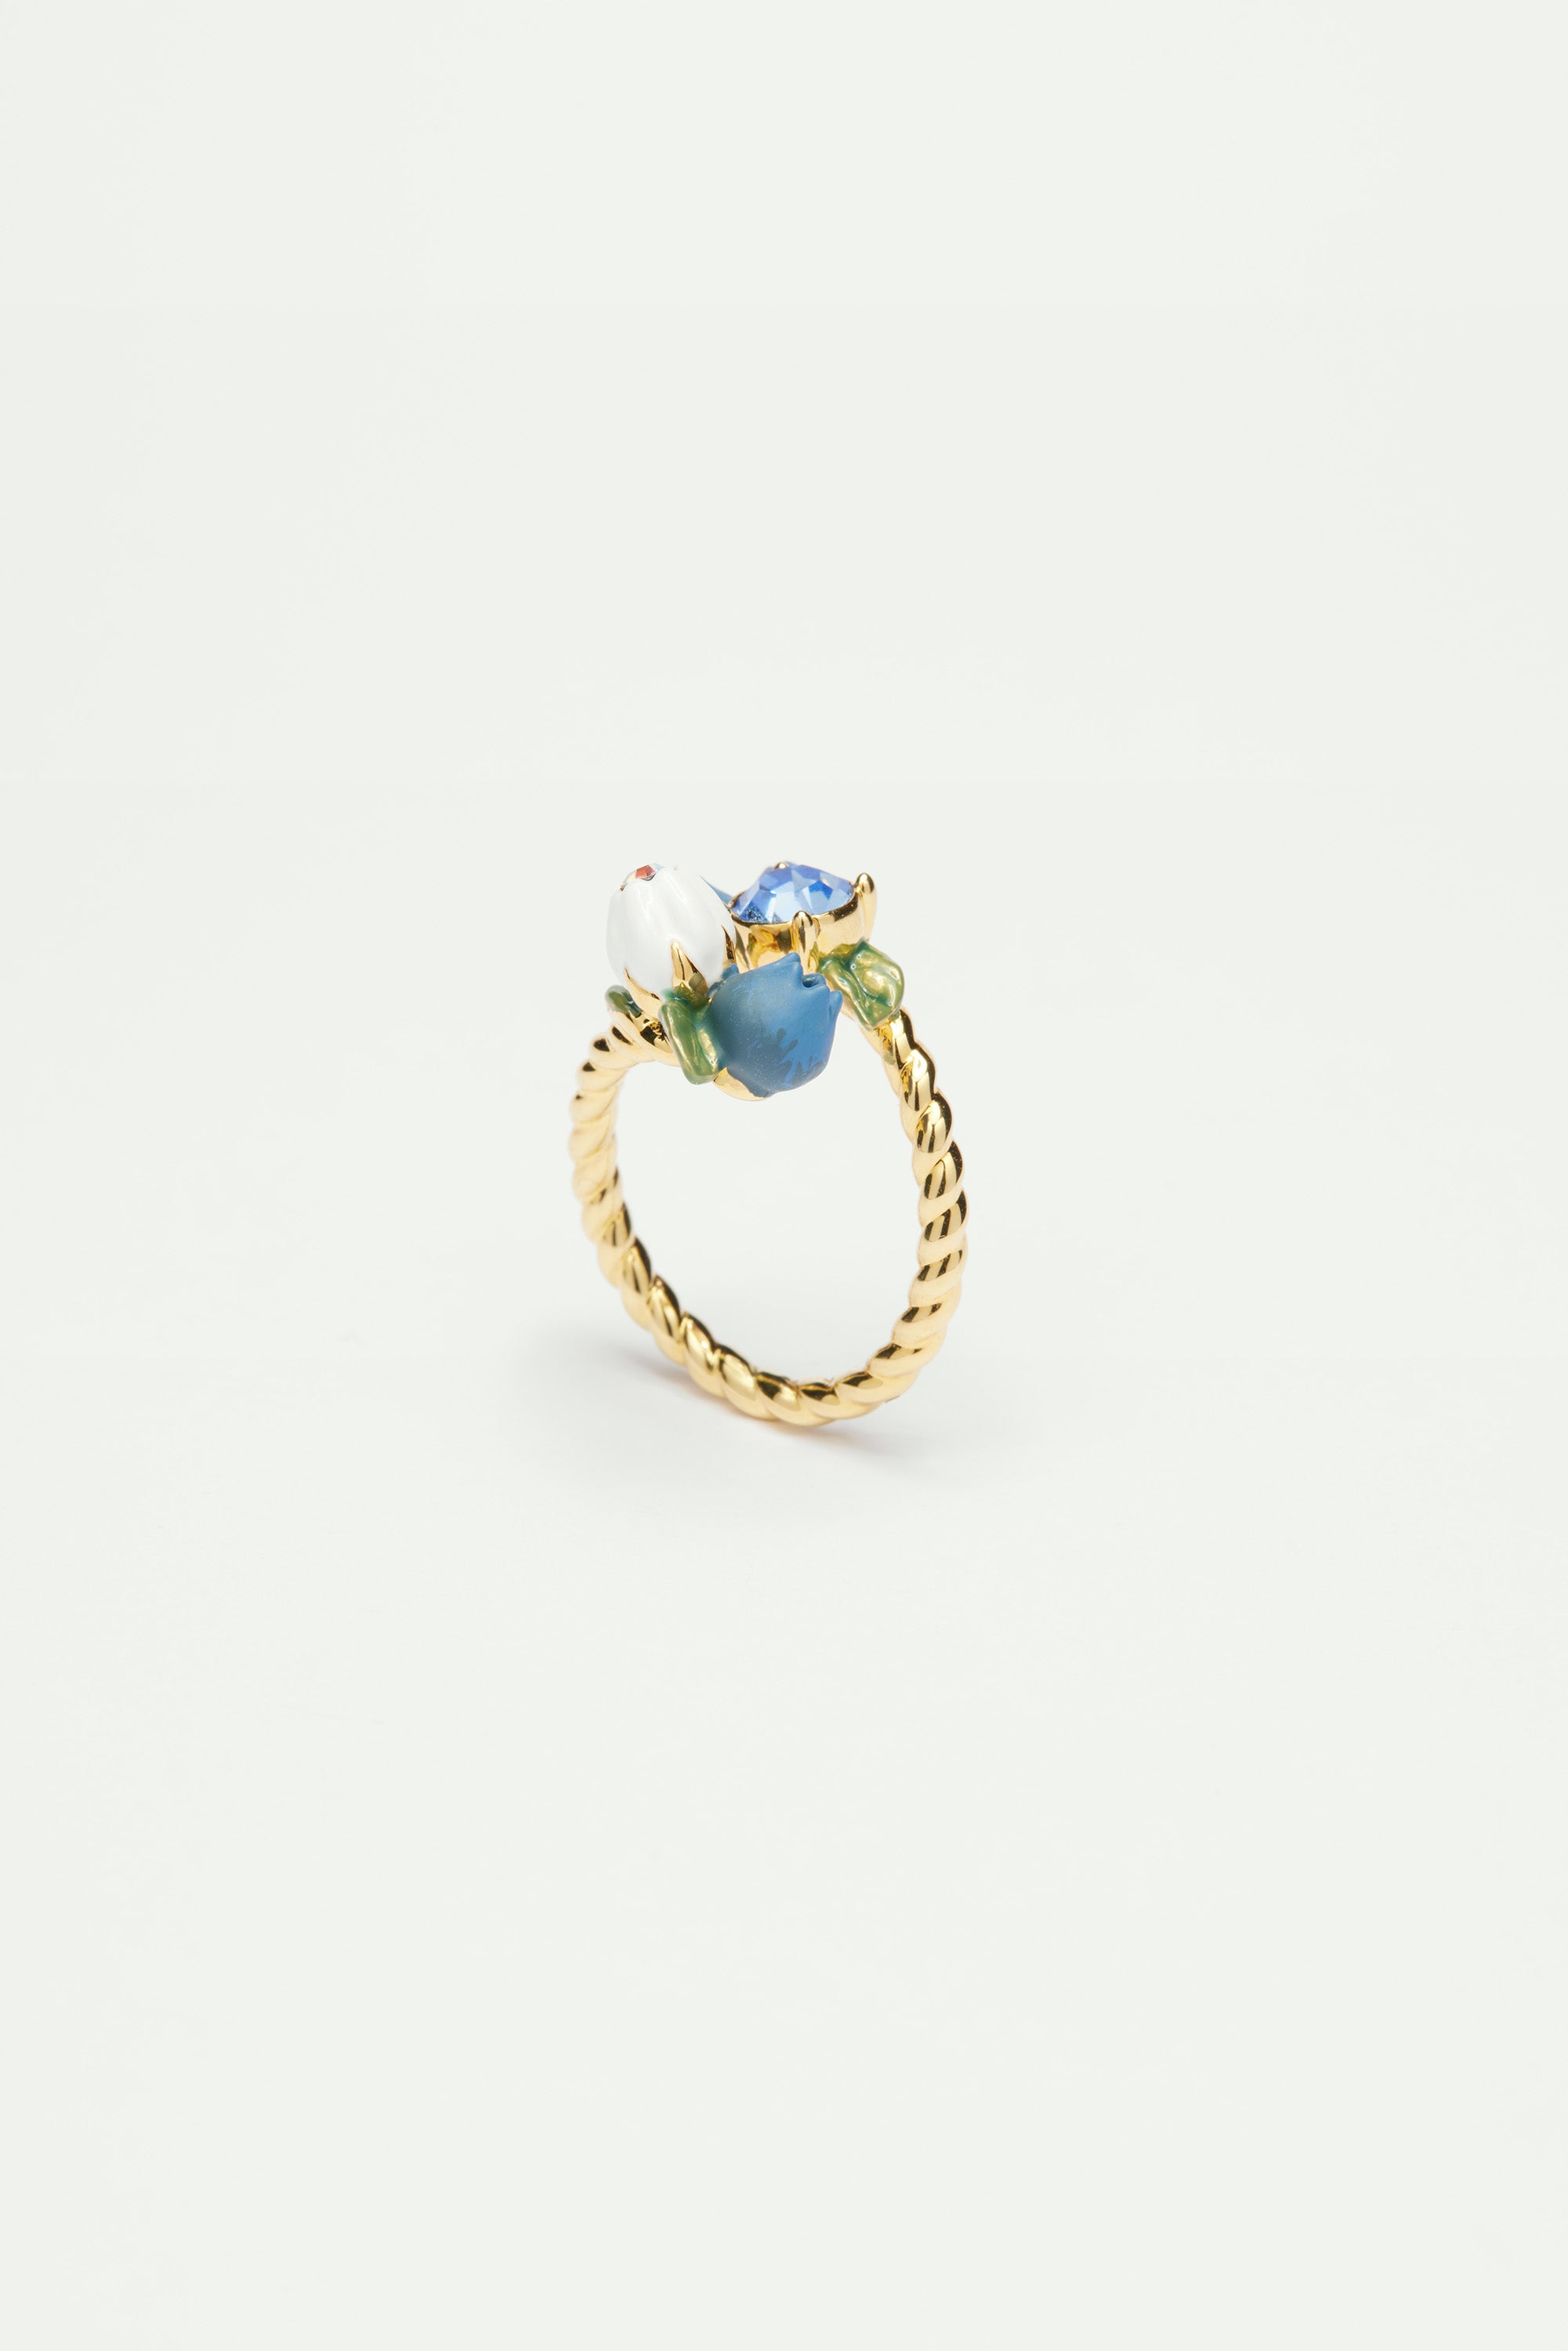 Blueberry and round stone adjustable ring